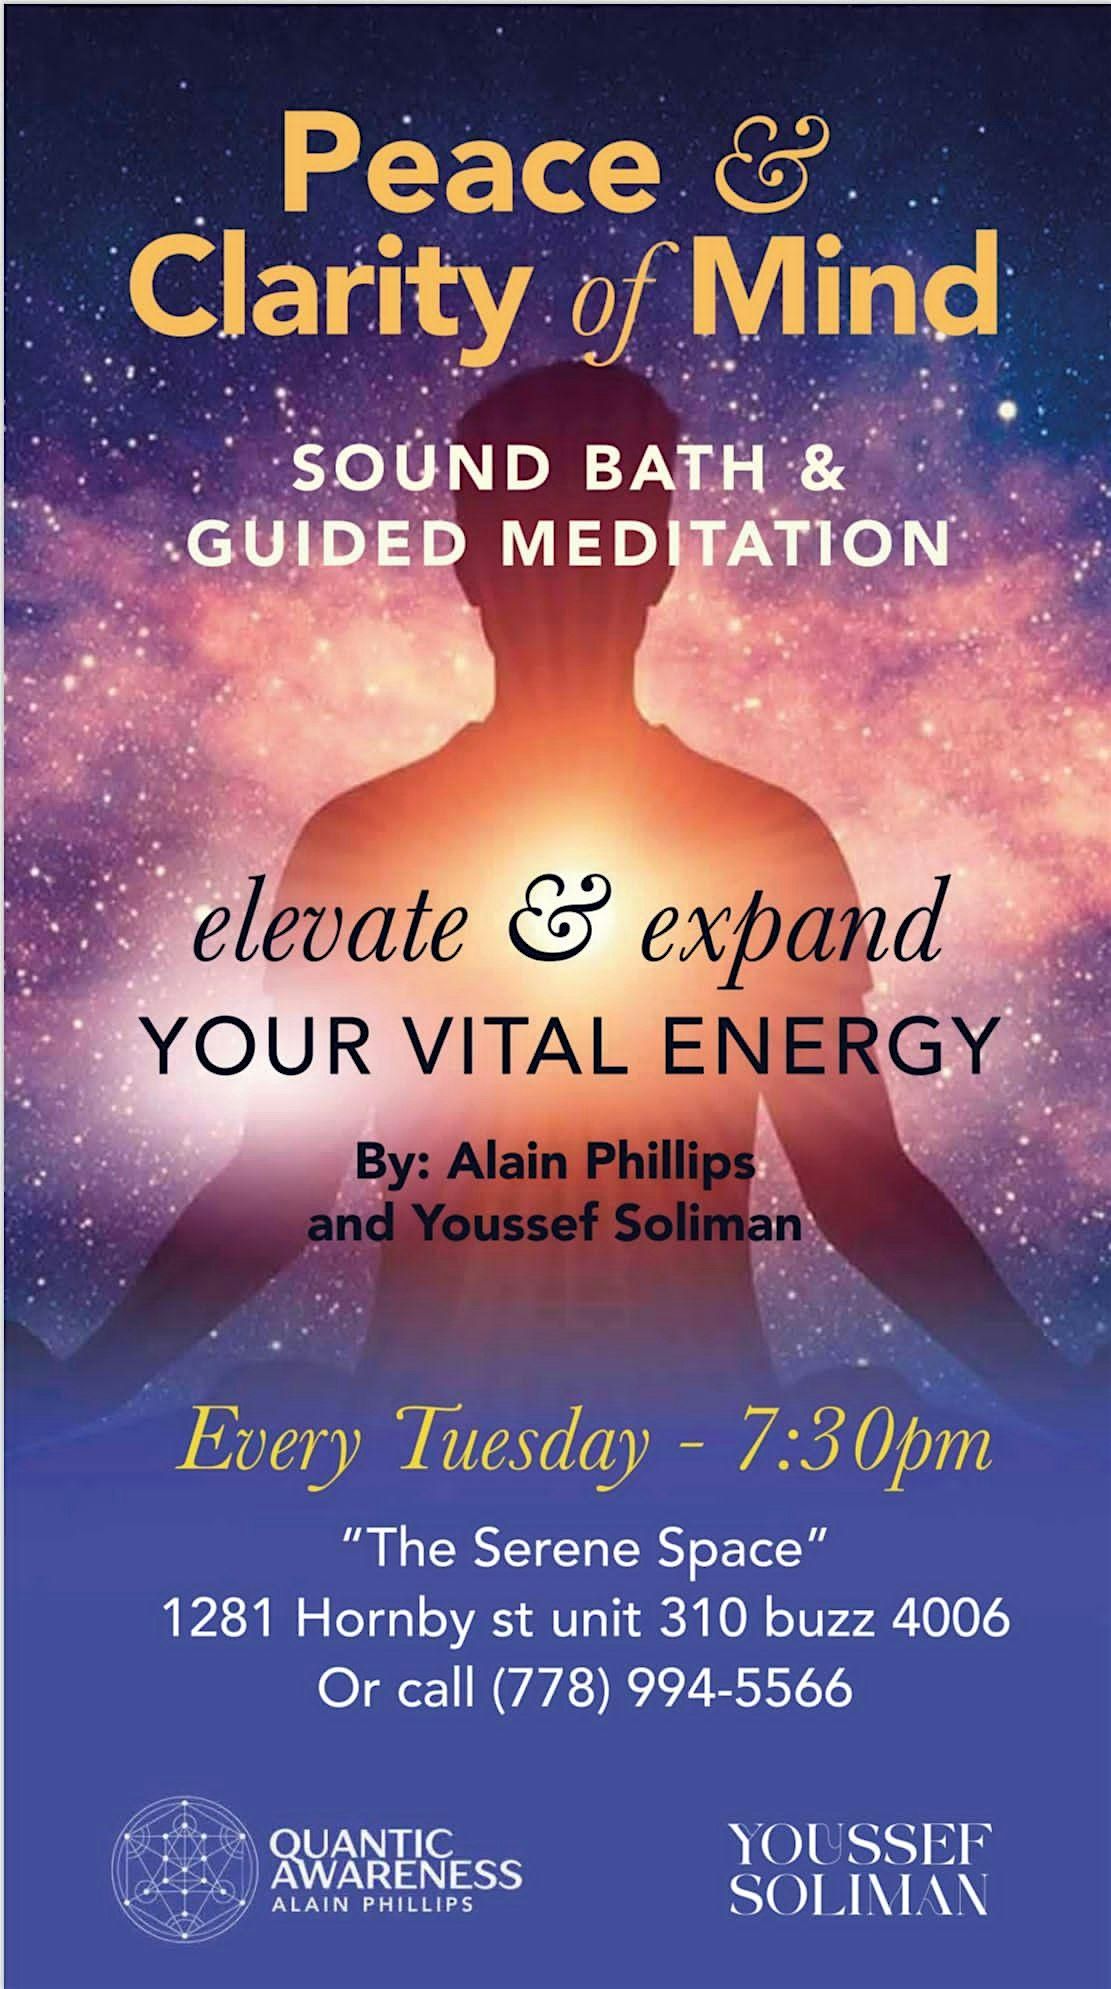 Peace & Clarity of Mind (sound bath and guided meditation )